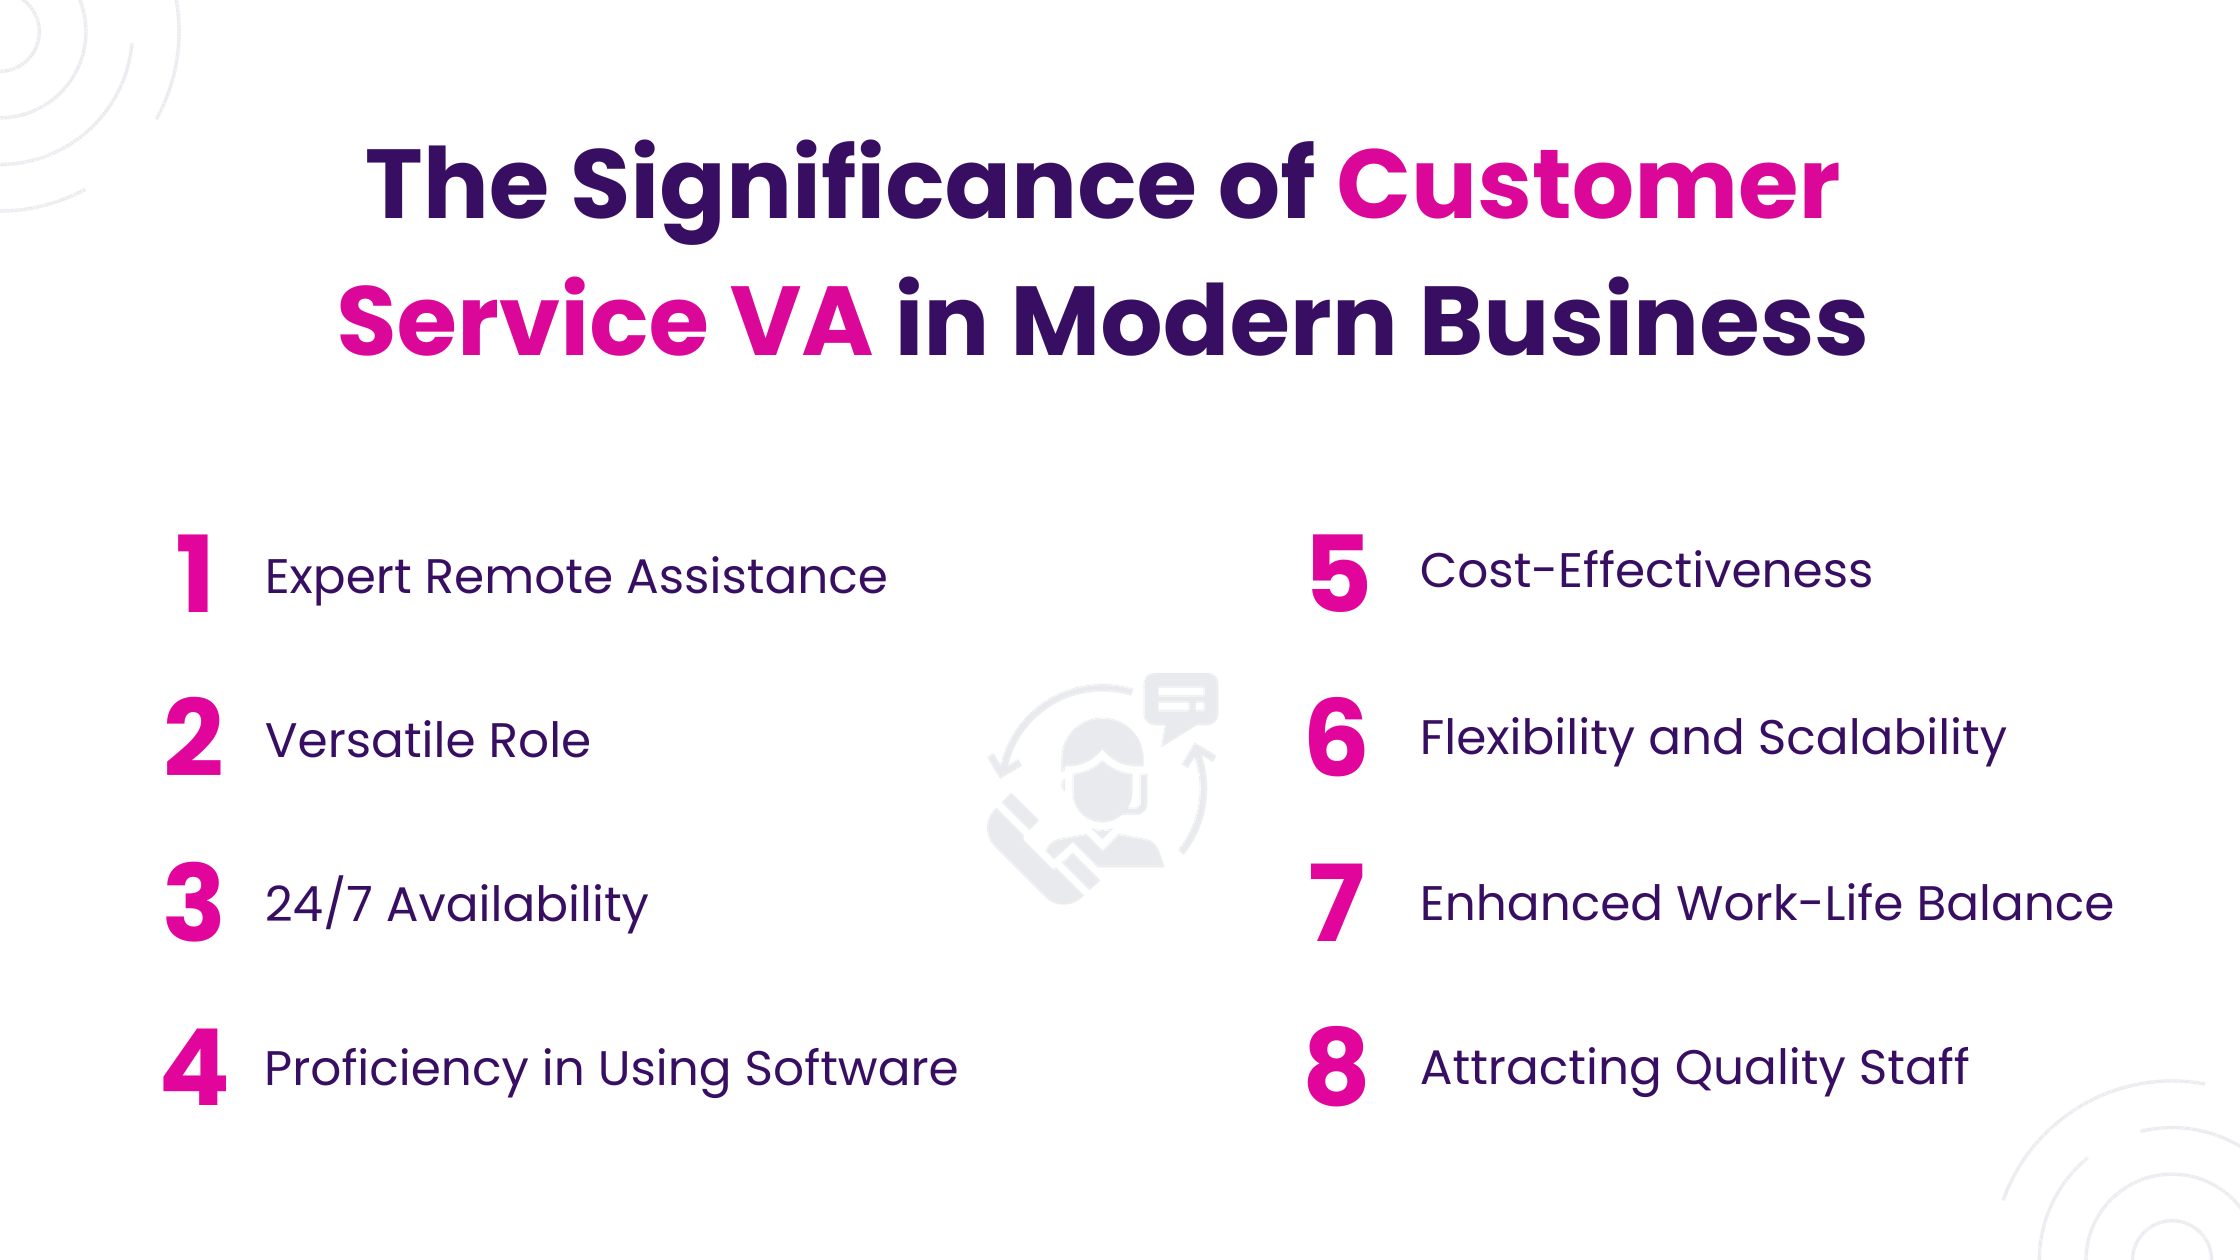 The Significance of Customer Service VA in Modern Business